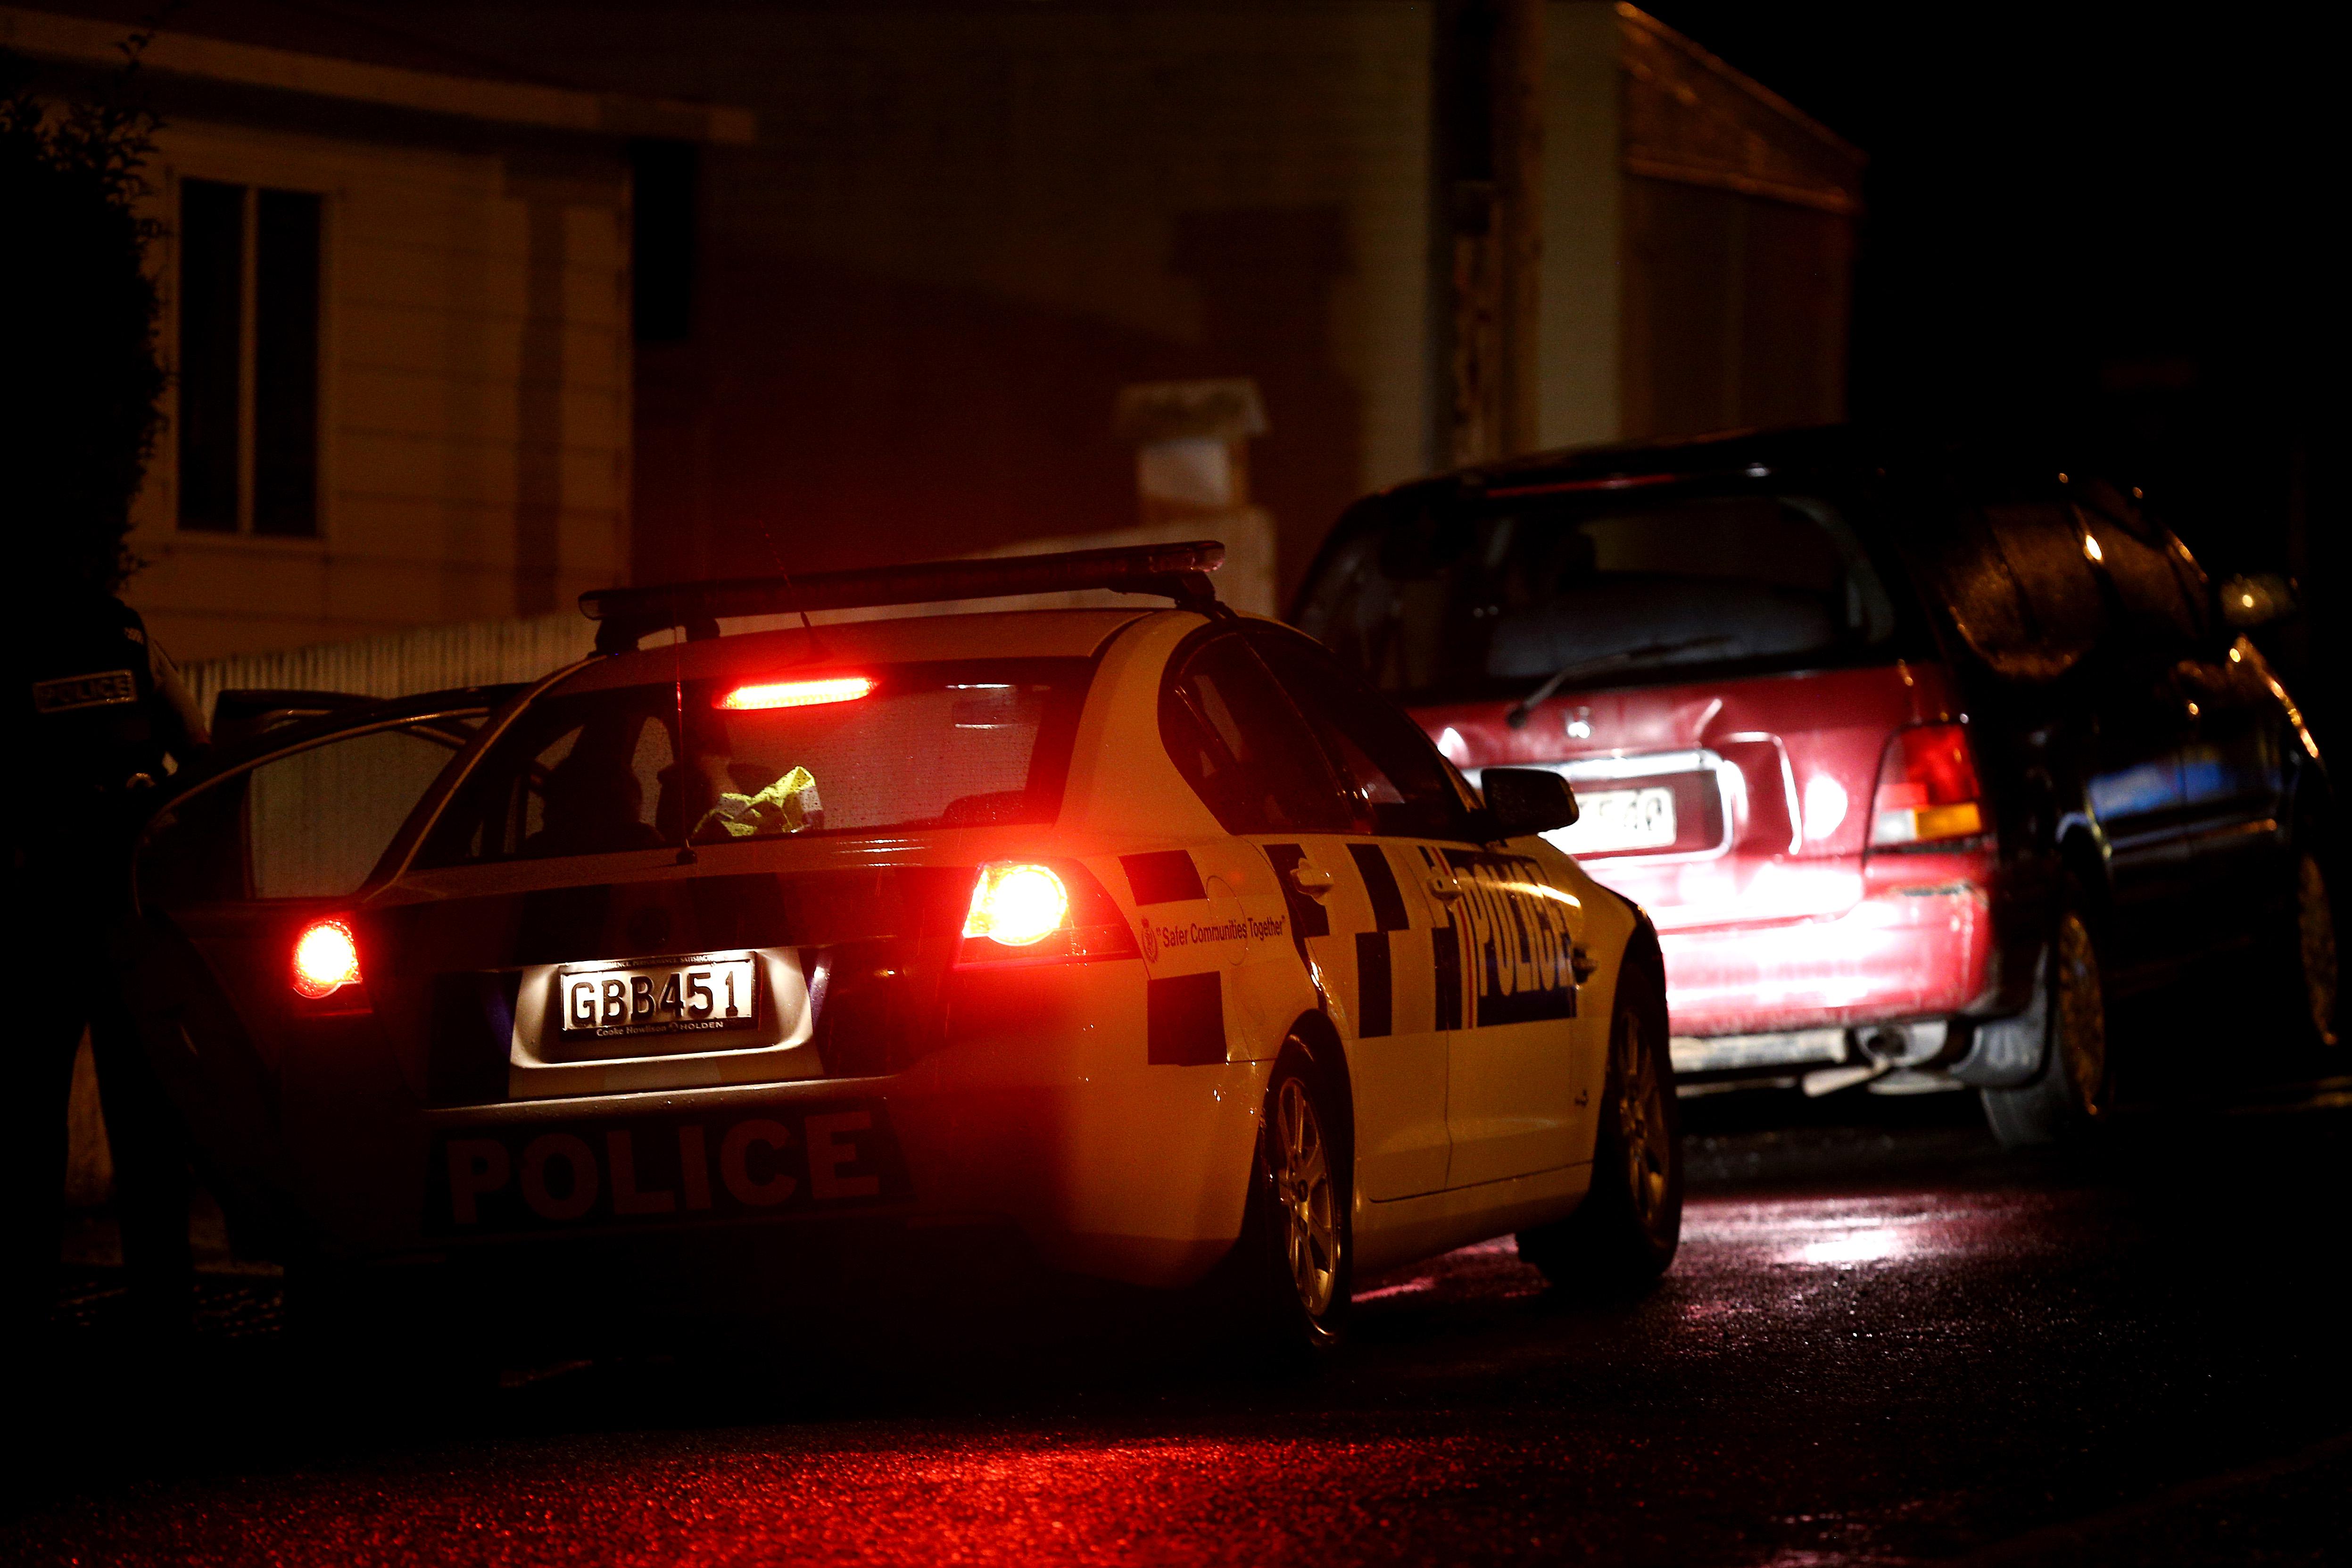 Police investigate a property in Dunedin, New Zealand. Residents have been evacuated off the street as police investigate a property believed to be related to the deadly terror attacks in Christchurch on Friday.